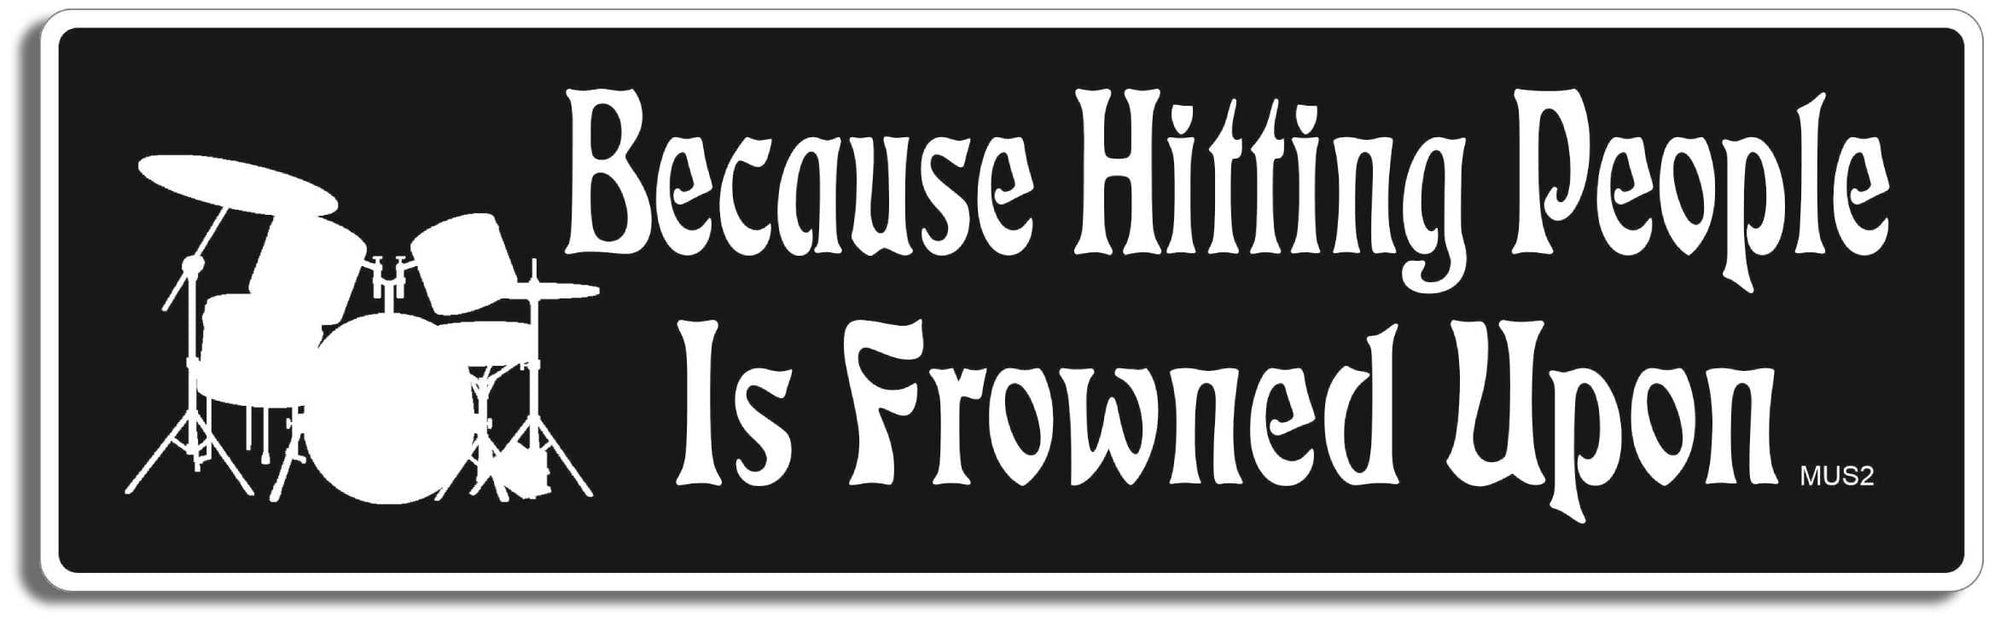 Because Hitting People Is Frowned Upon (Drums) - 3" x 10" Bumper Sticker--Car Magnet- -  Decal Bumper Sticker-funny Bumper Sticker Car Magnet Because Hitting People Is Frowned-  Decal for cars music